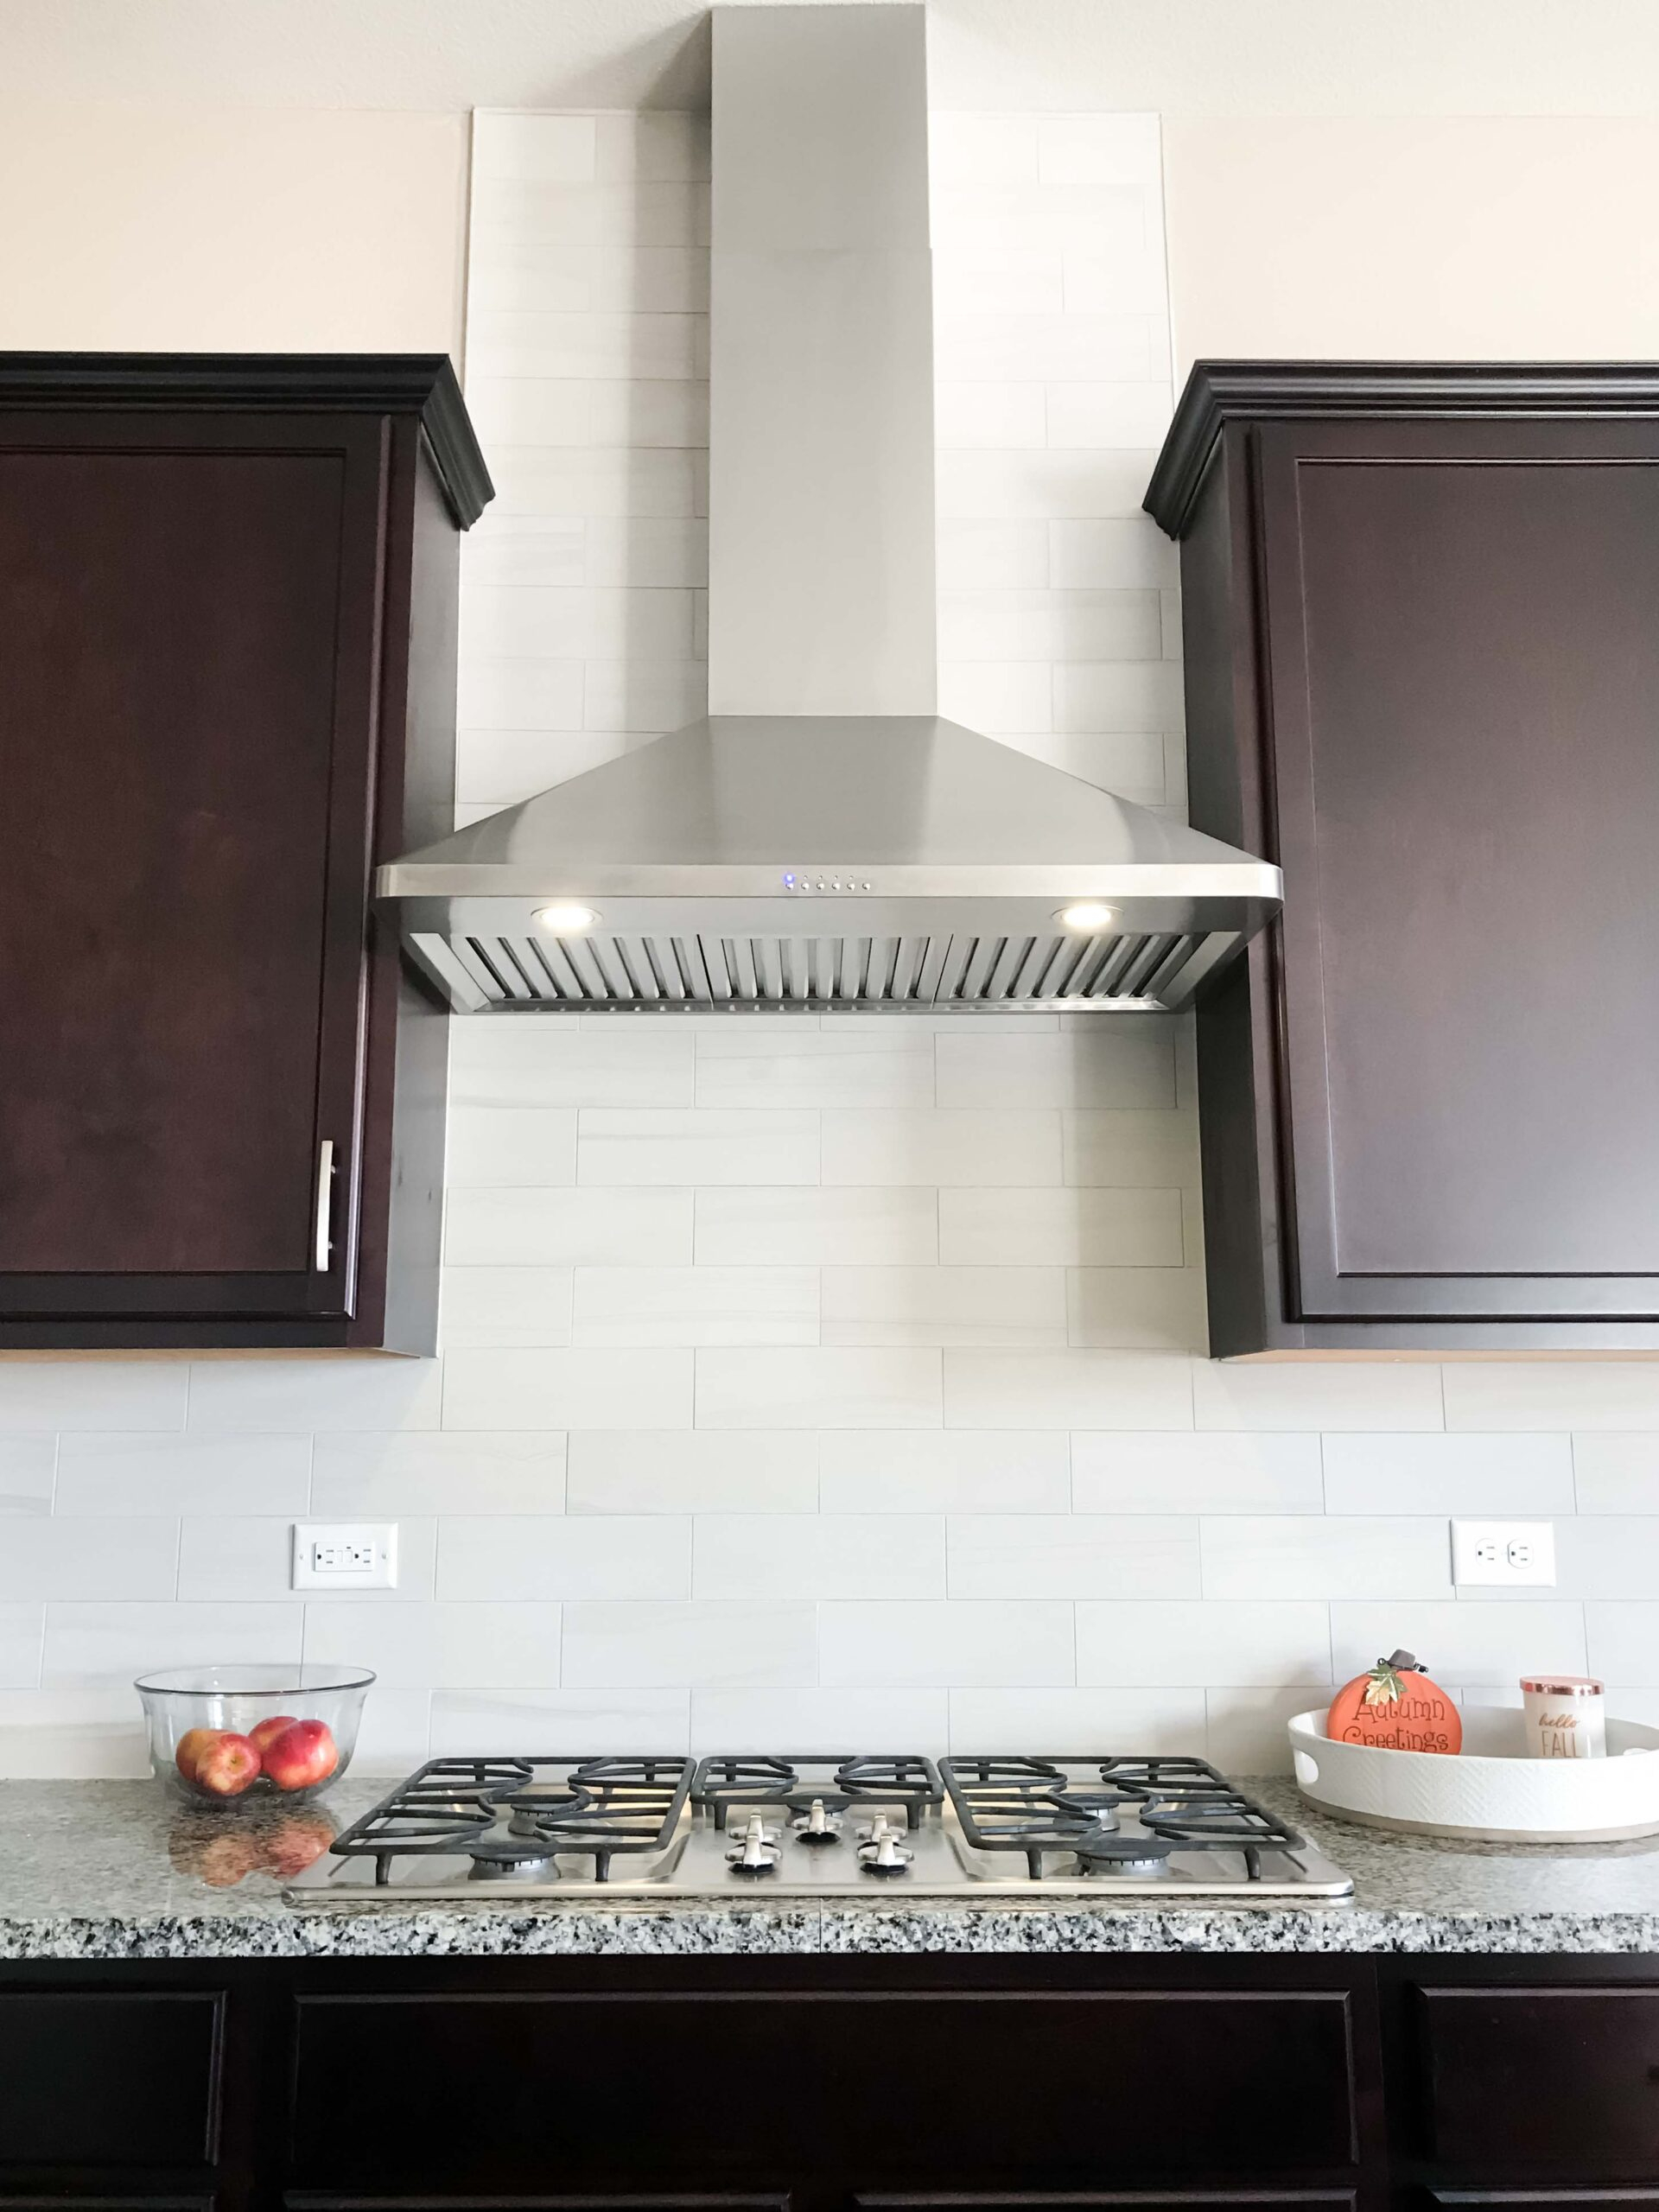 Clean Your Range Hood Blower In 10 Minutes Or Less intended for size 1920 X 2560